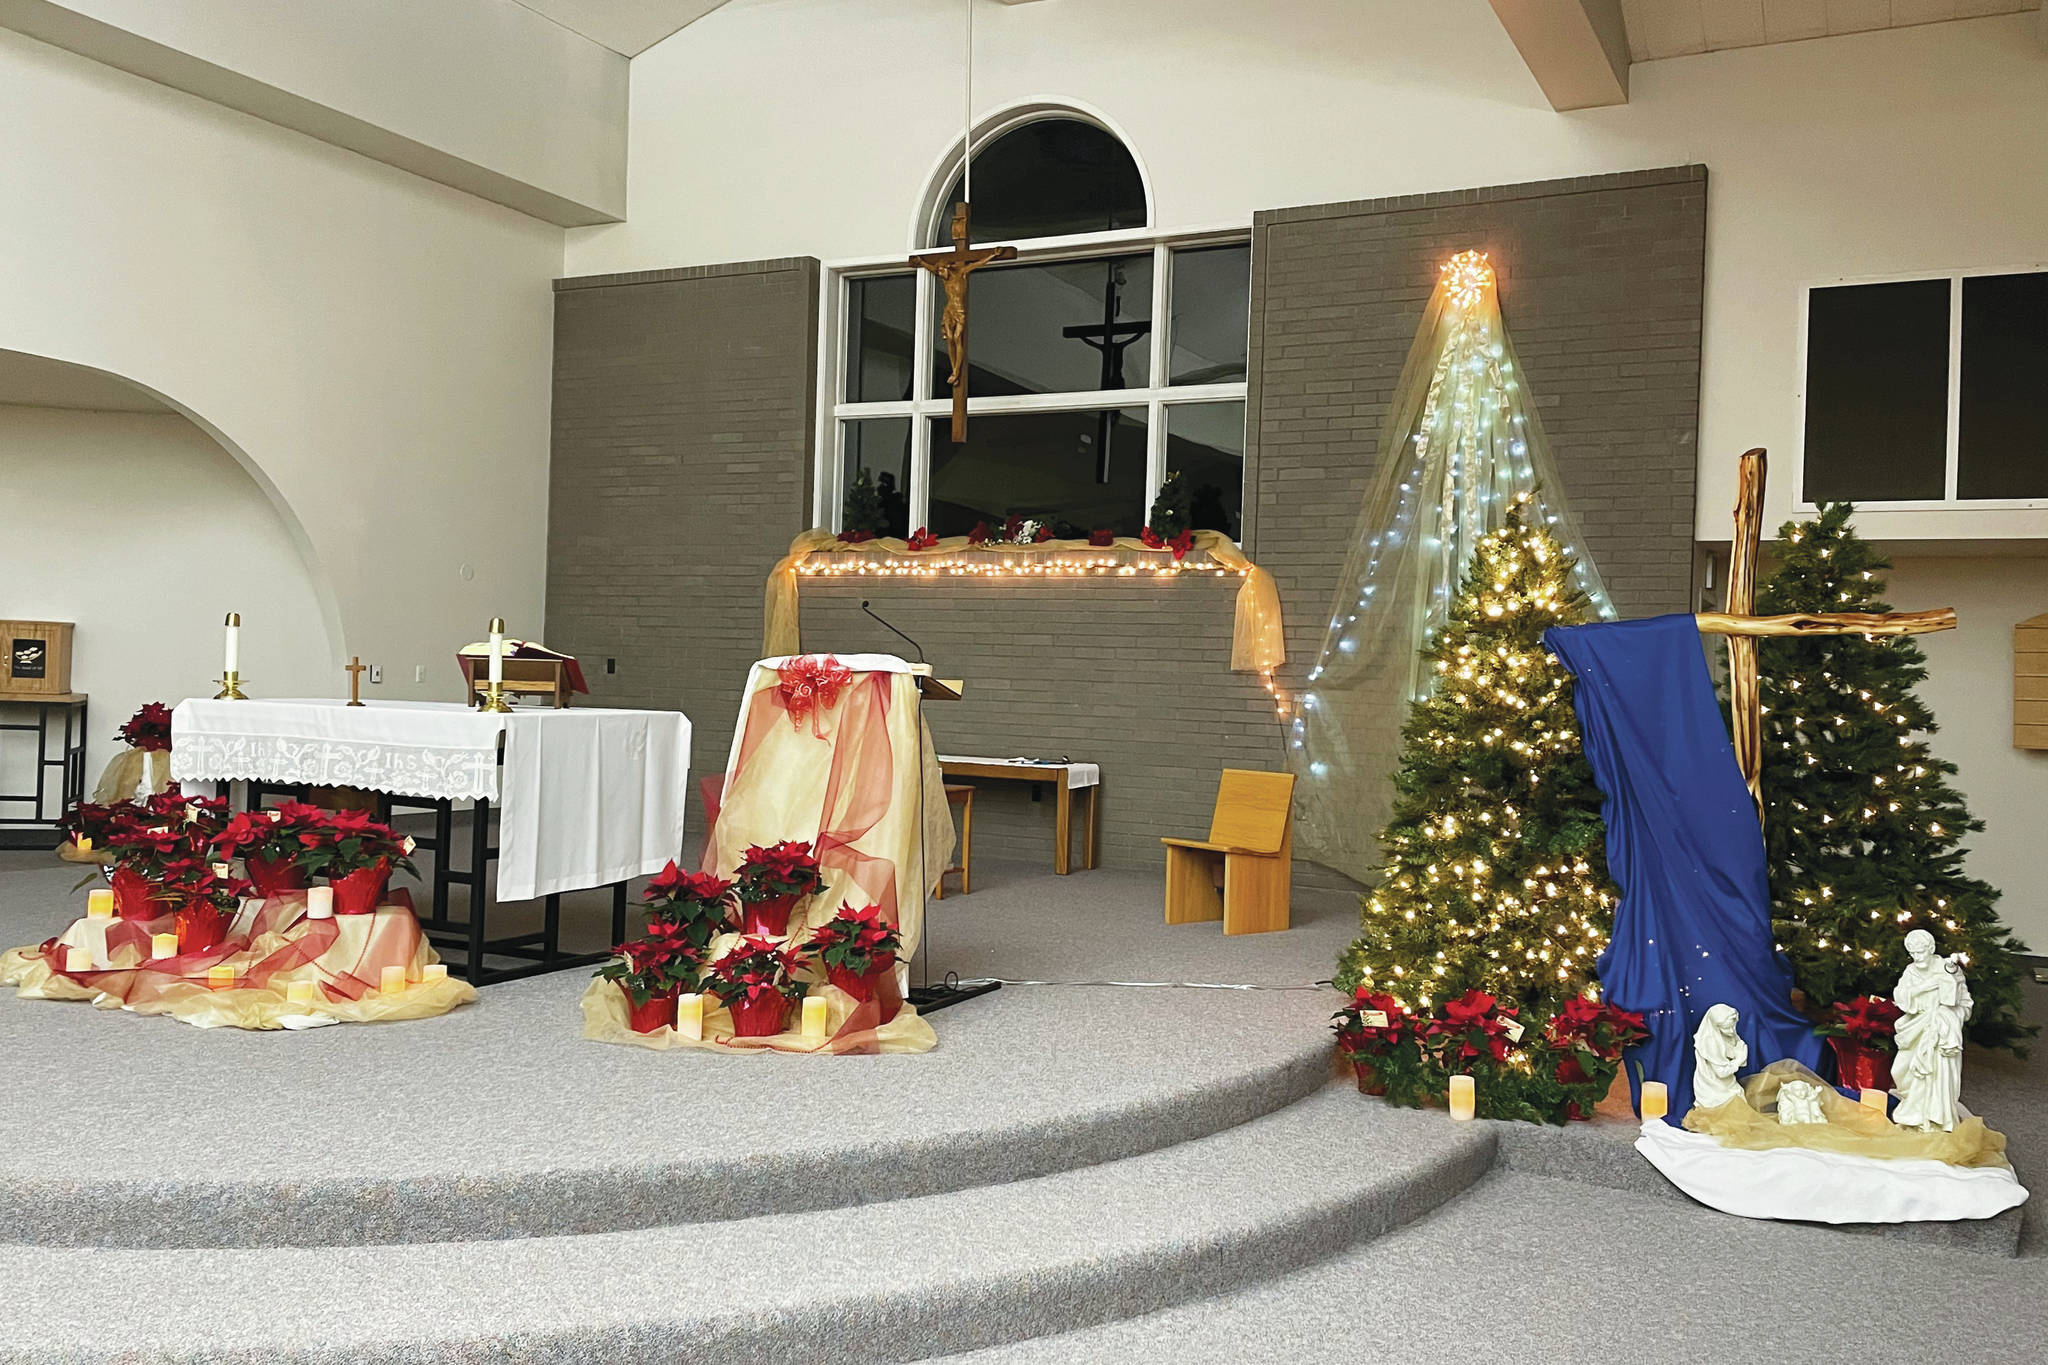 An altar at Our Lady Perpetual Help Catholic Church is seen on Wednesday, in Soldotna, Alaska. (Photo courtesy of Kathryn Dunagan)